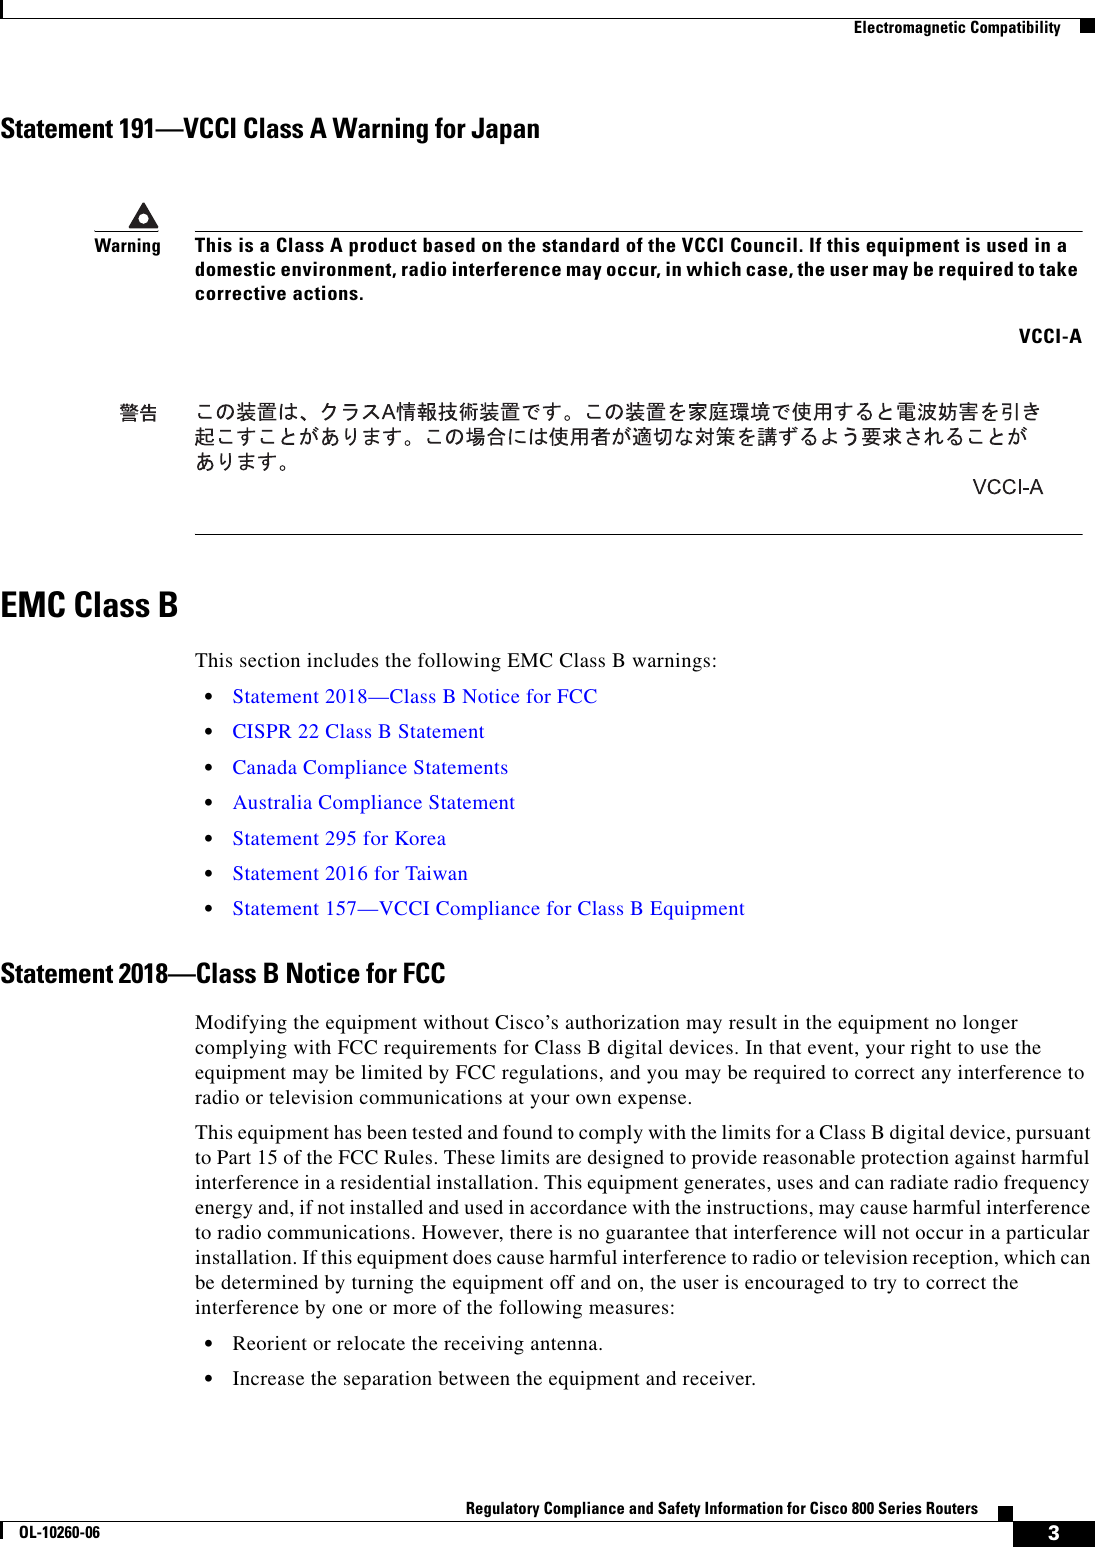 3Regulatory Compliance and Safety Information for Cisco 800 Series RoutersOL-10260-06  Electromagnetic CompatibilityStatement 191—VCCI Class A Warning for JapanEMC Class BThis section includes the following EMC Class B warnings:  • Statement 2018—Class B Notice for FCC  • CISPR 22 Class B Statement  • Canada Compliance Statements  • Australia Compliance Statement  • Statement 295 for Korea  • Statement 2016 for Taiwan  • Statement 157—VCCI Compliance for Class B EquipmentStatement 2018—Class B Notice for FCCModifying the equipment without Cisco’s authorization may result in the equipment no longer complying with FCC requirements for Class B digital devices. In that event, your right to use the equipment may be limited by FCC regulations, and you may be required to correct any interference to radio or television communications at your own expense.This equipment has been tested and found to comply with the limits for a Class B digital device, pursuant to Part 15 of the FCC Rules. These limits are designed to provide reasonable protection against harmful interference in a residential installation. This equipment generates, uses and can radiate radio frequency energy and, if not installed and used in accordance with the instructions, may cause harmful interference to radio communications. However, there is no guarantee that interference will not occur in a particular installation. If this equipment does cause harmful interference to radio or television reception, which can be determined by turning the equipment off and on, the user is encouraged to try to correct the interference by one or more of the following measures:   • Reorient or relocate the receiving antenna.   • Increase the separation between the equipment and receiver.WarningThis is a Class A product based on the standard of the VCCI Council. If this equipment is used in a domestic environment, radio interference may occur, in which case, the user may be required to take corrective actions.VCCI-A